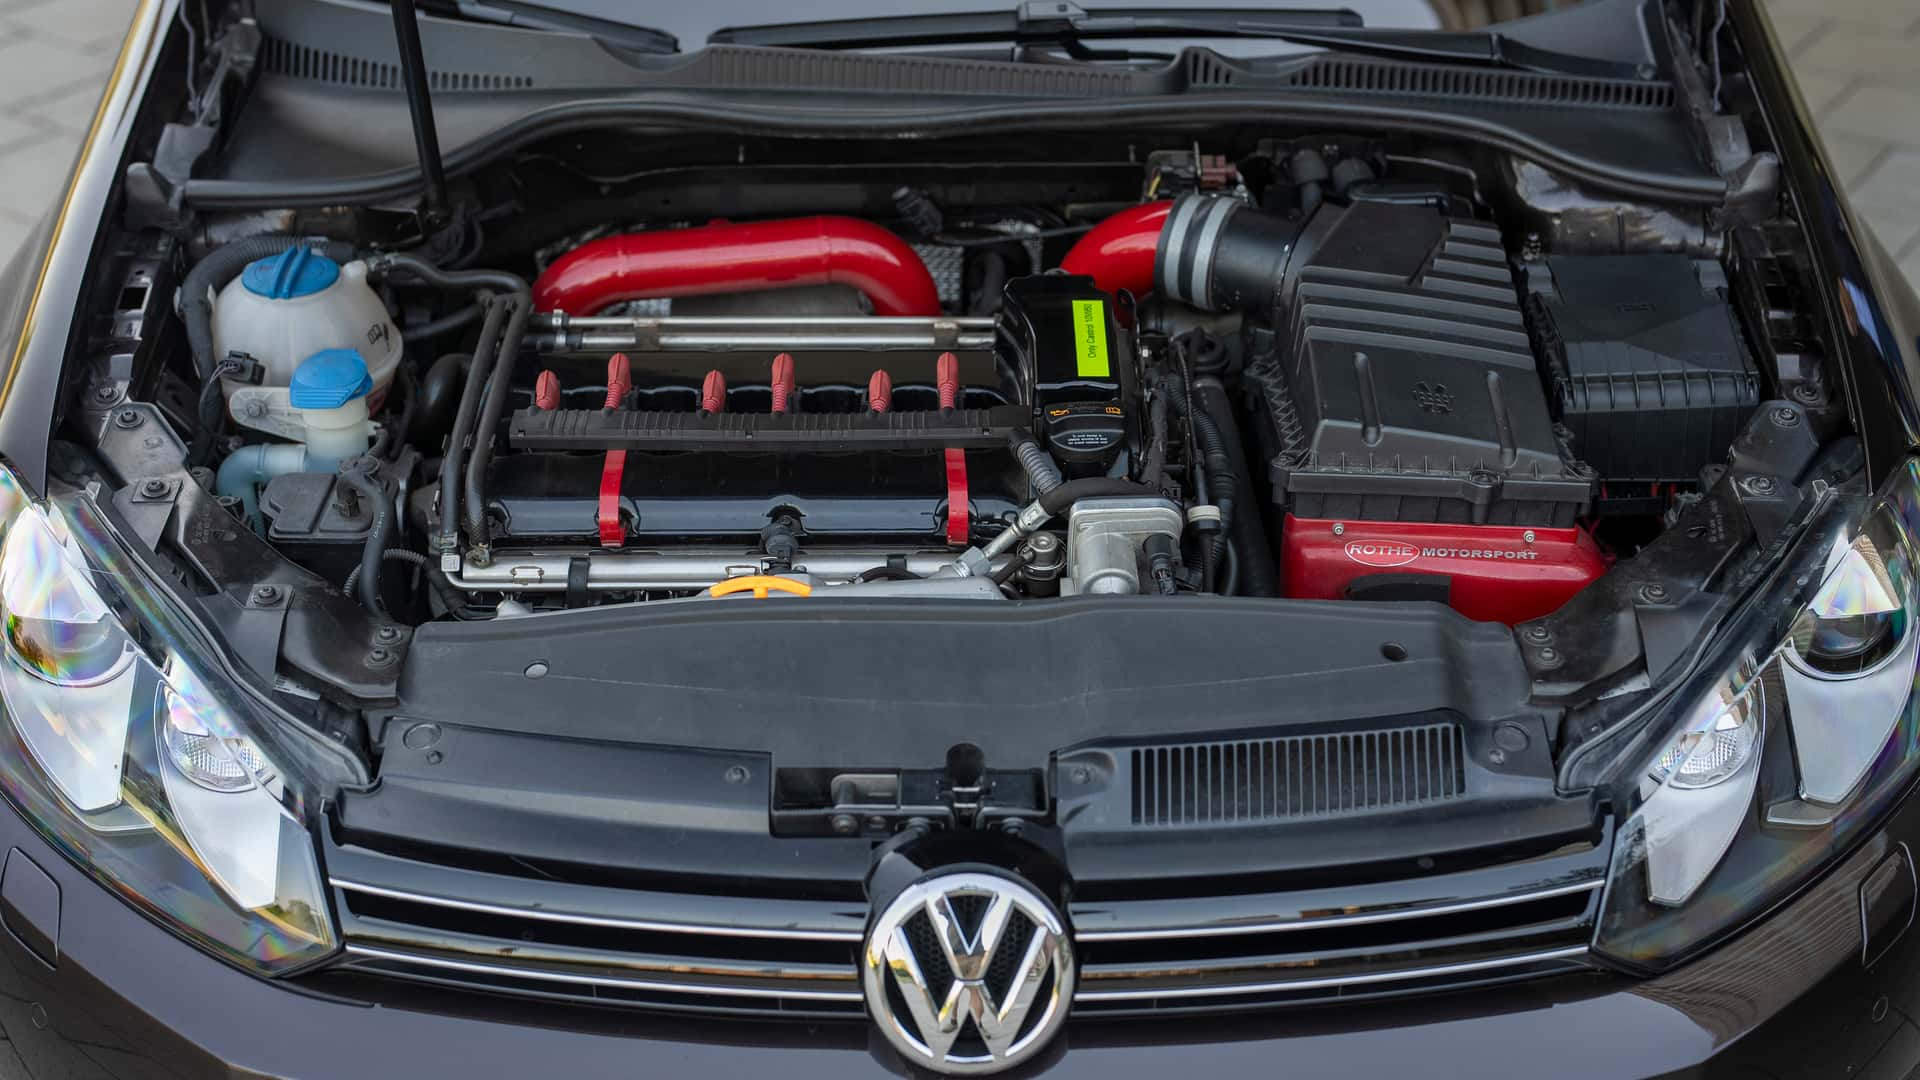 Volkswagen reveals Golf Mk6 prototype with VR-6 engine: Check features